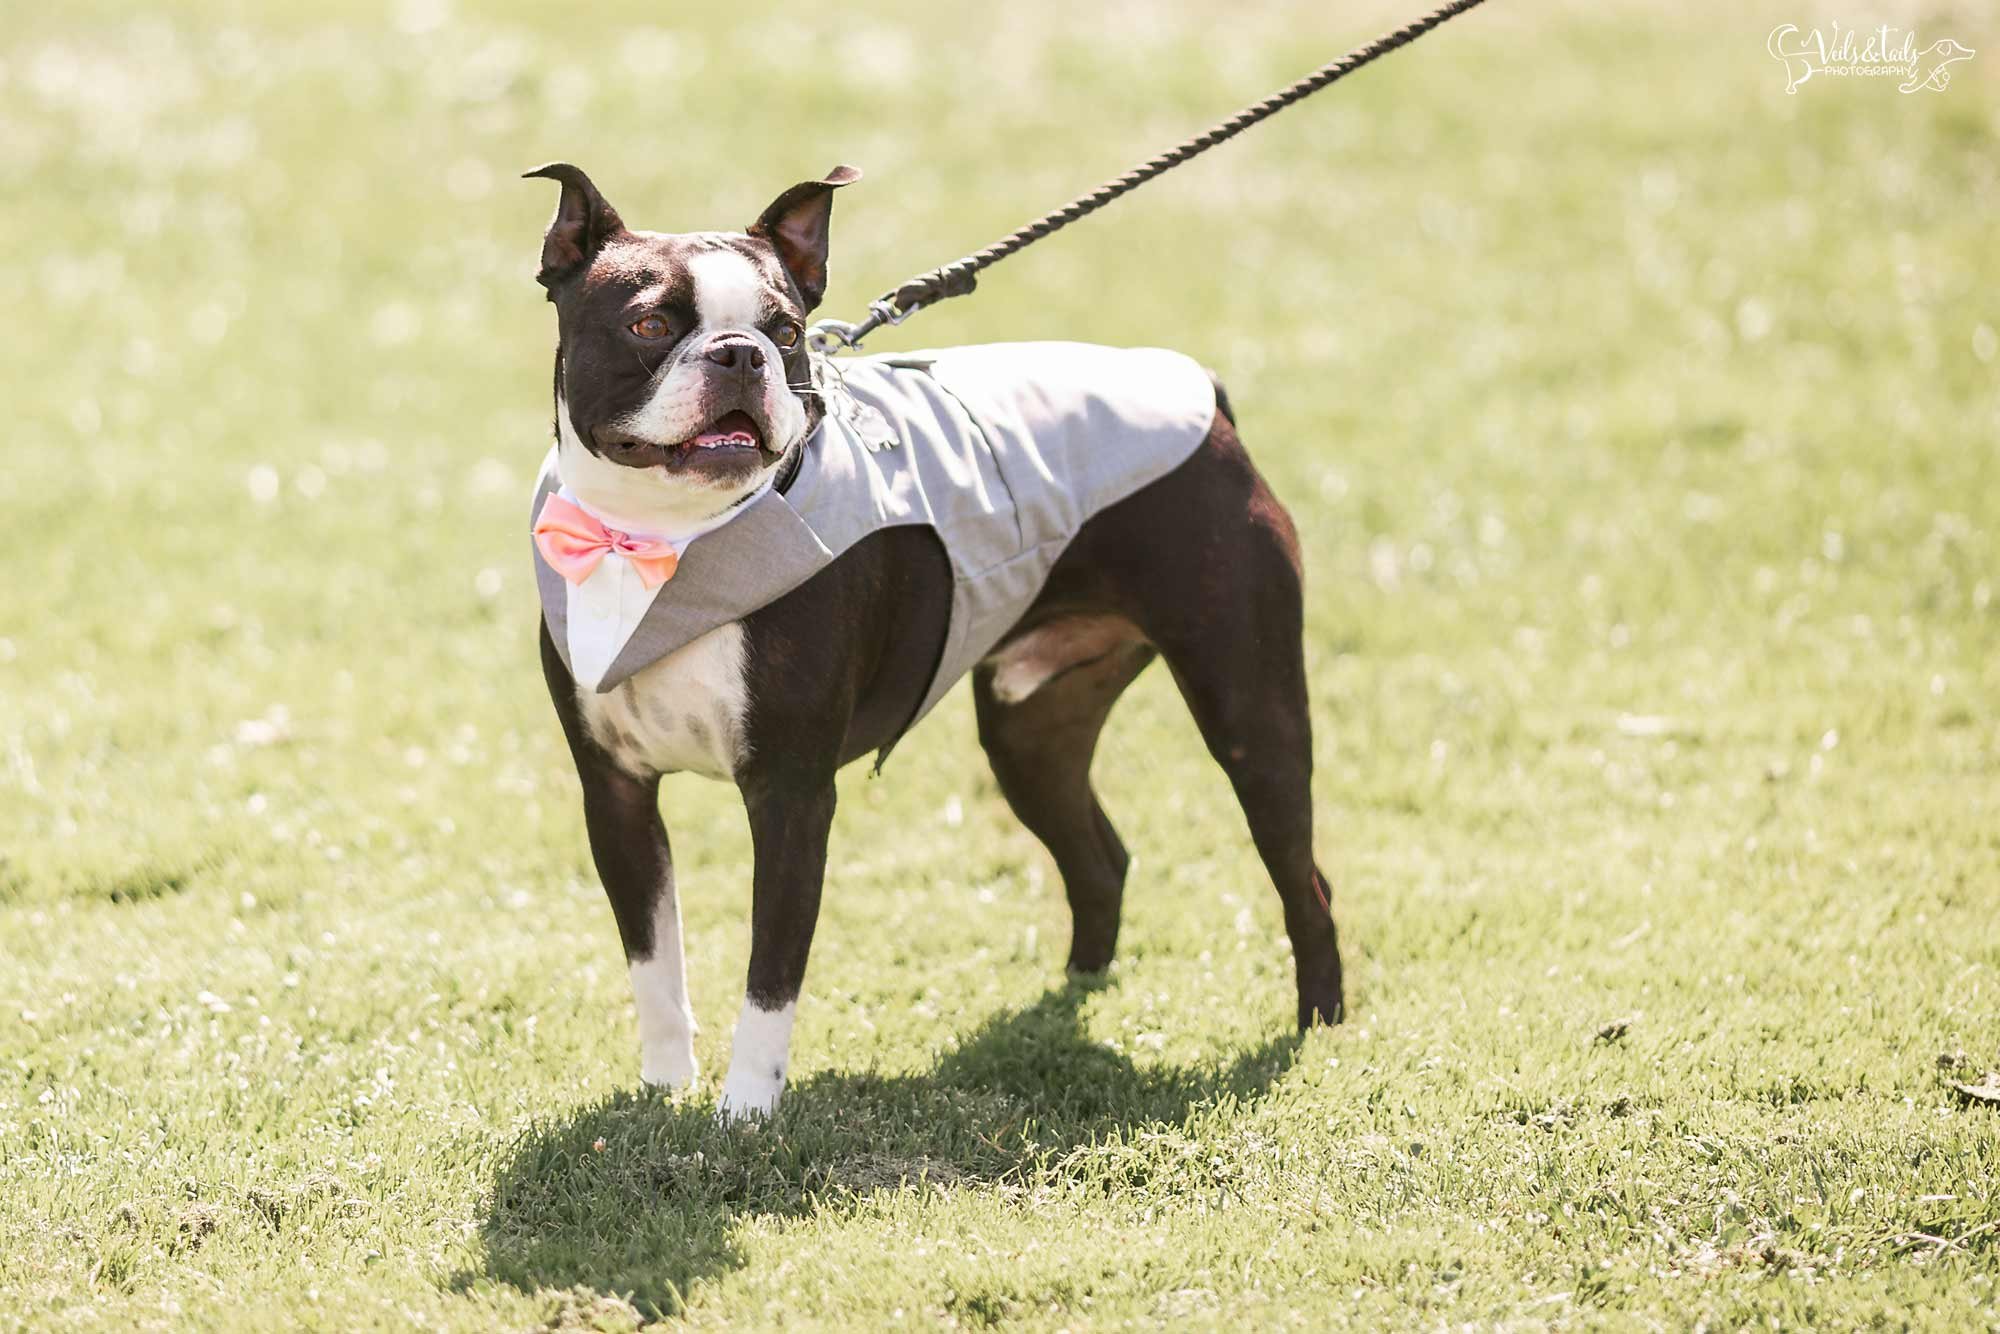 Dog wedding photography - Boston Terrier in a tux